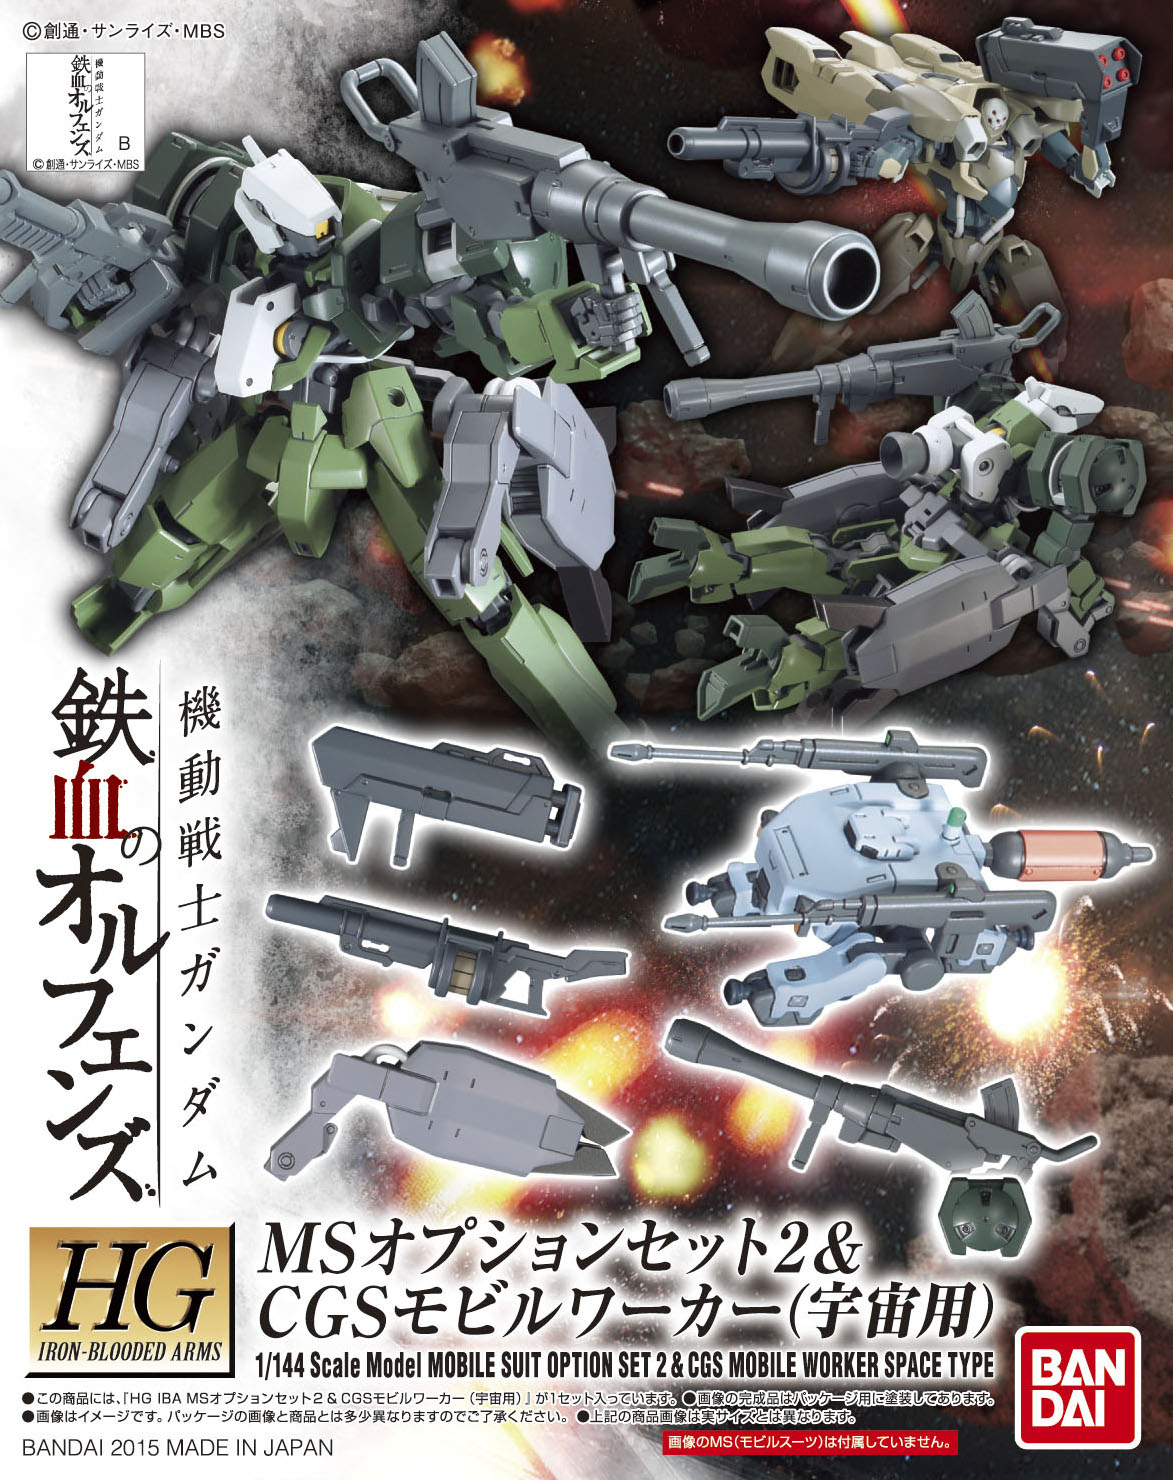 HG 1/144 MSオプションセット2＆CGSモビルワーカー（宇宙用） [Mobile Suit Option Set  CGS Mobile  Worker Space Type] ガンプラはじめました 1/144マニア